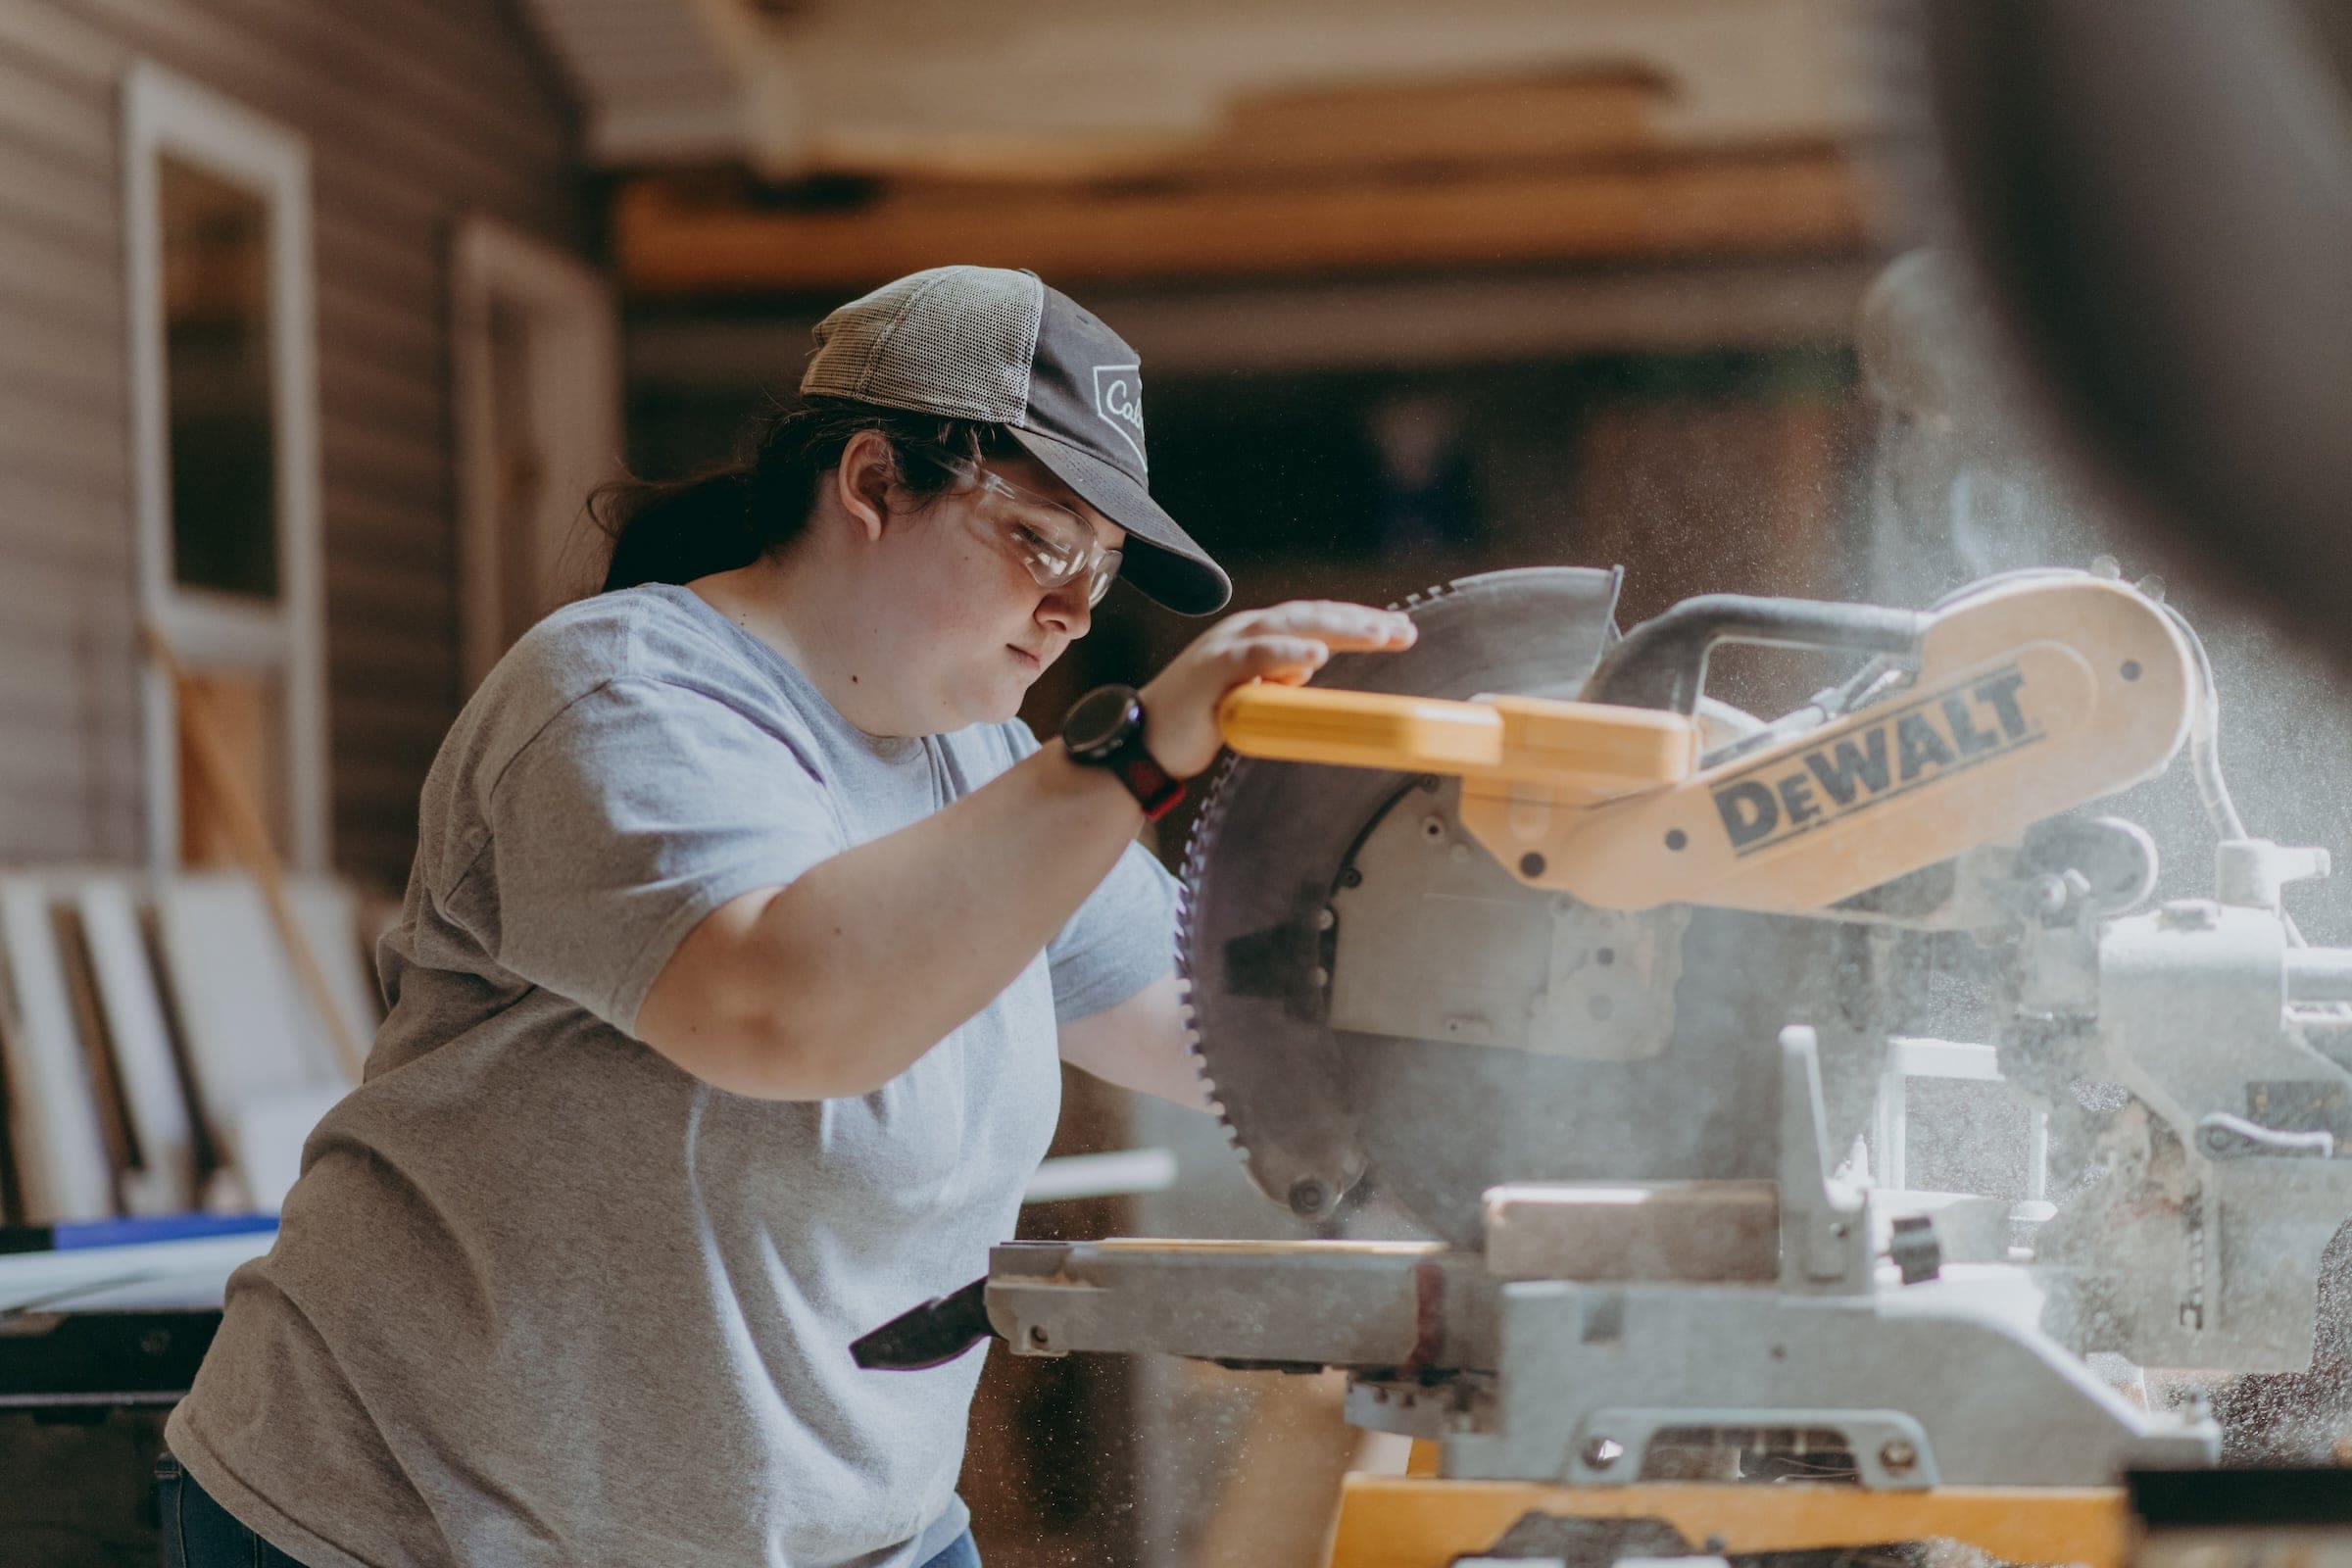 A carpentry student working with a saw in the shop at Thaddeus Stevens college of Technology.